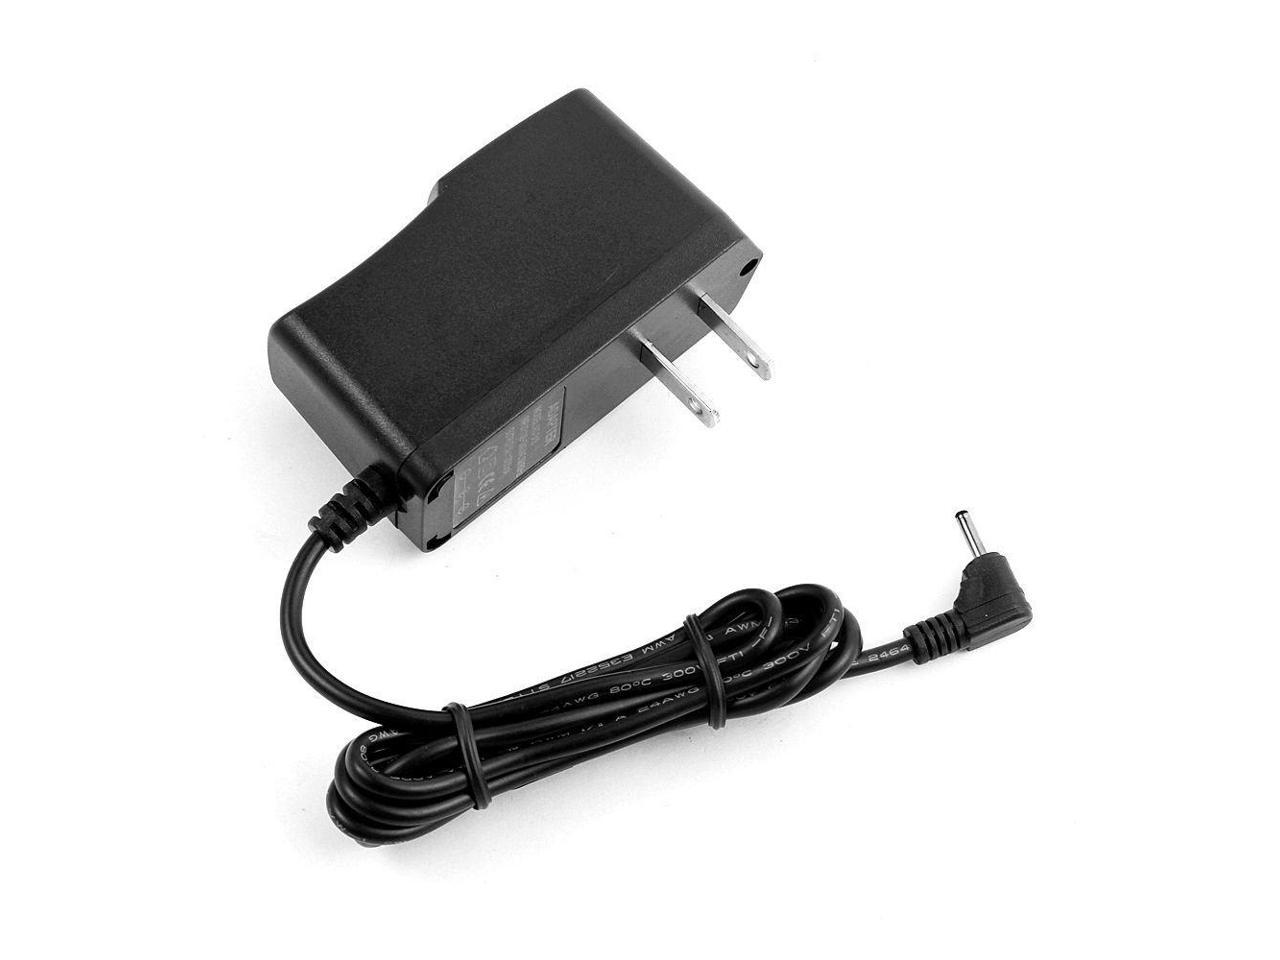 NiceTQ Replacement Wall AC Power Charger for Uniden Guardian G755 Security System 